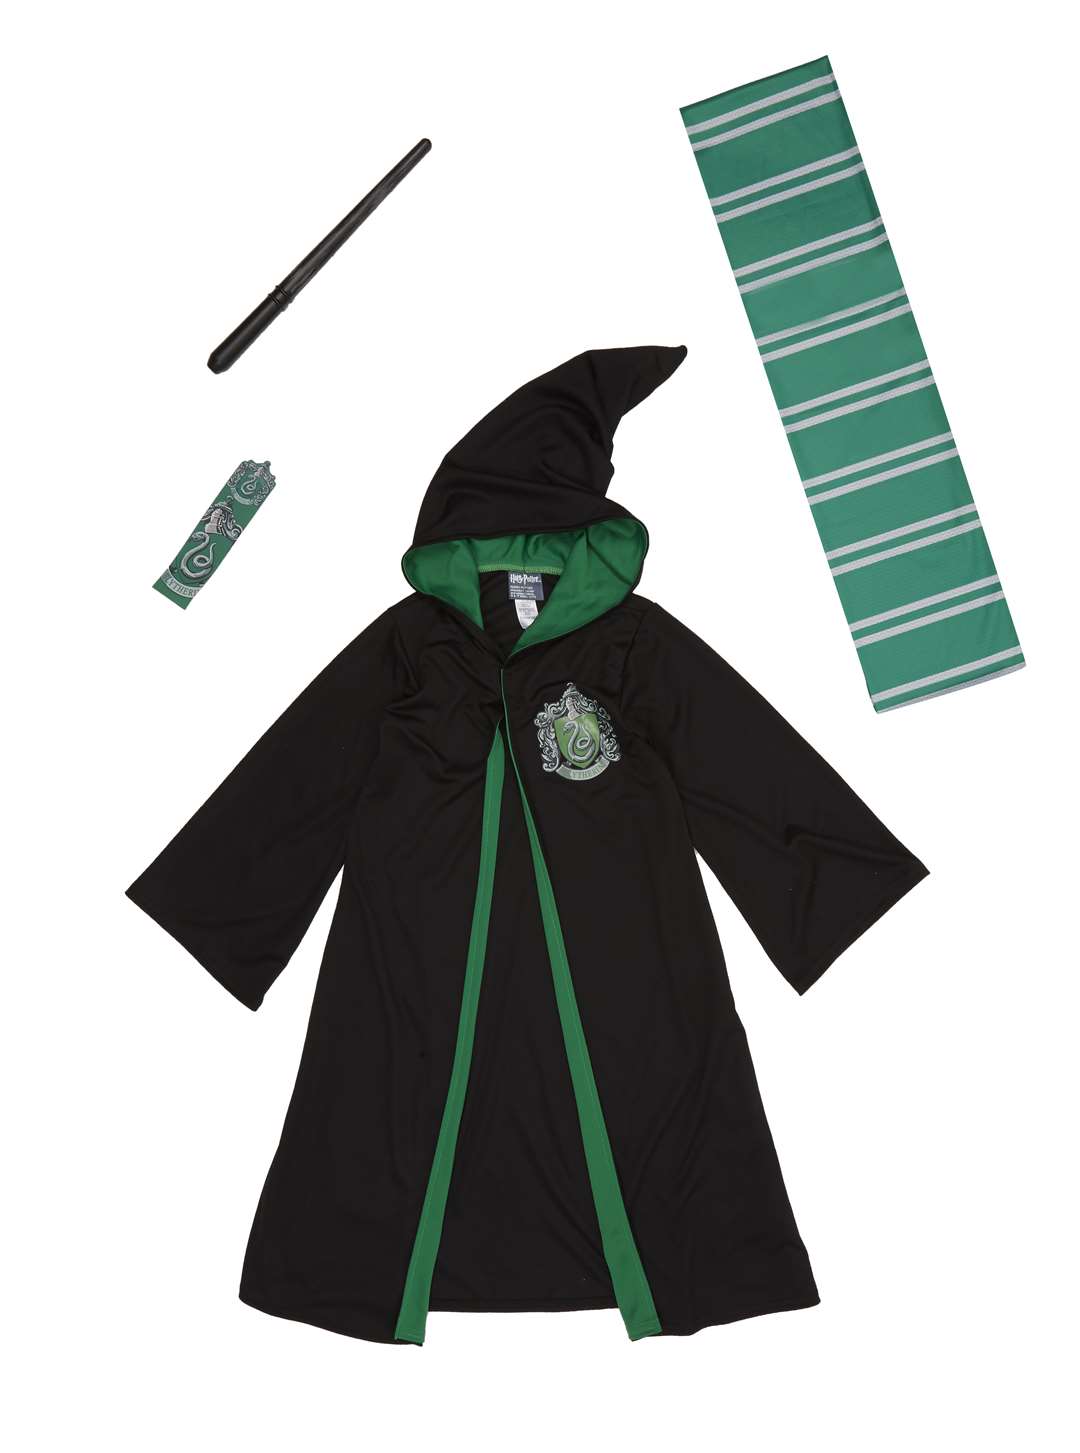 Draco Malfoy from Harry Potter. From £14